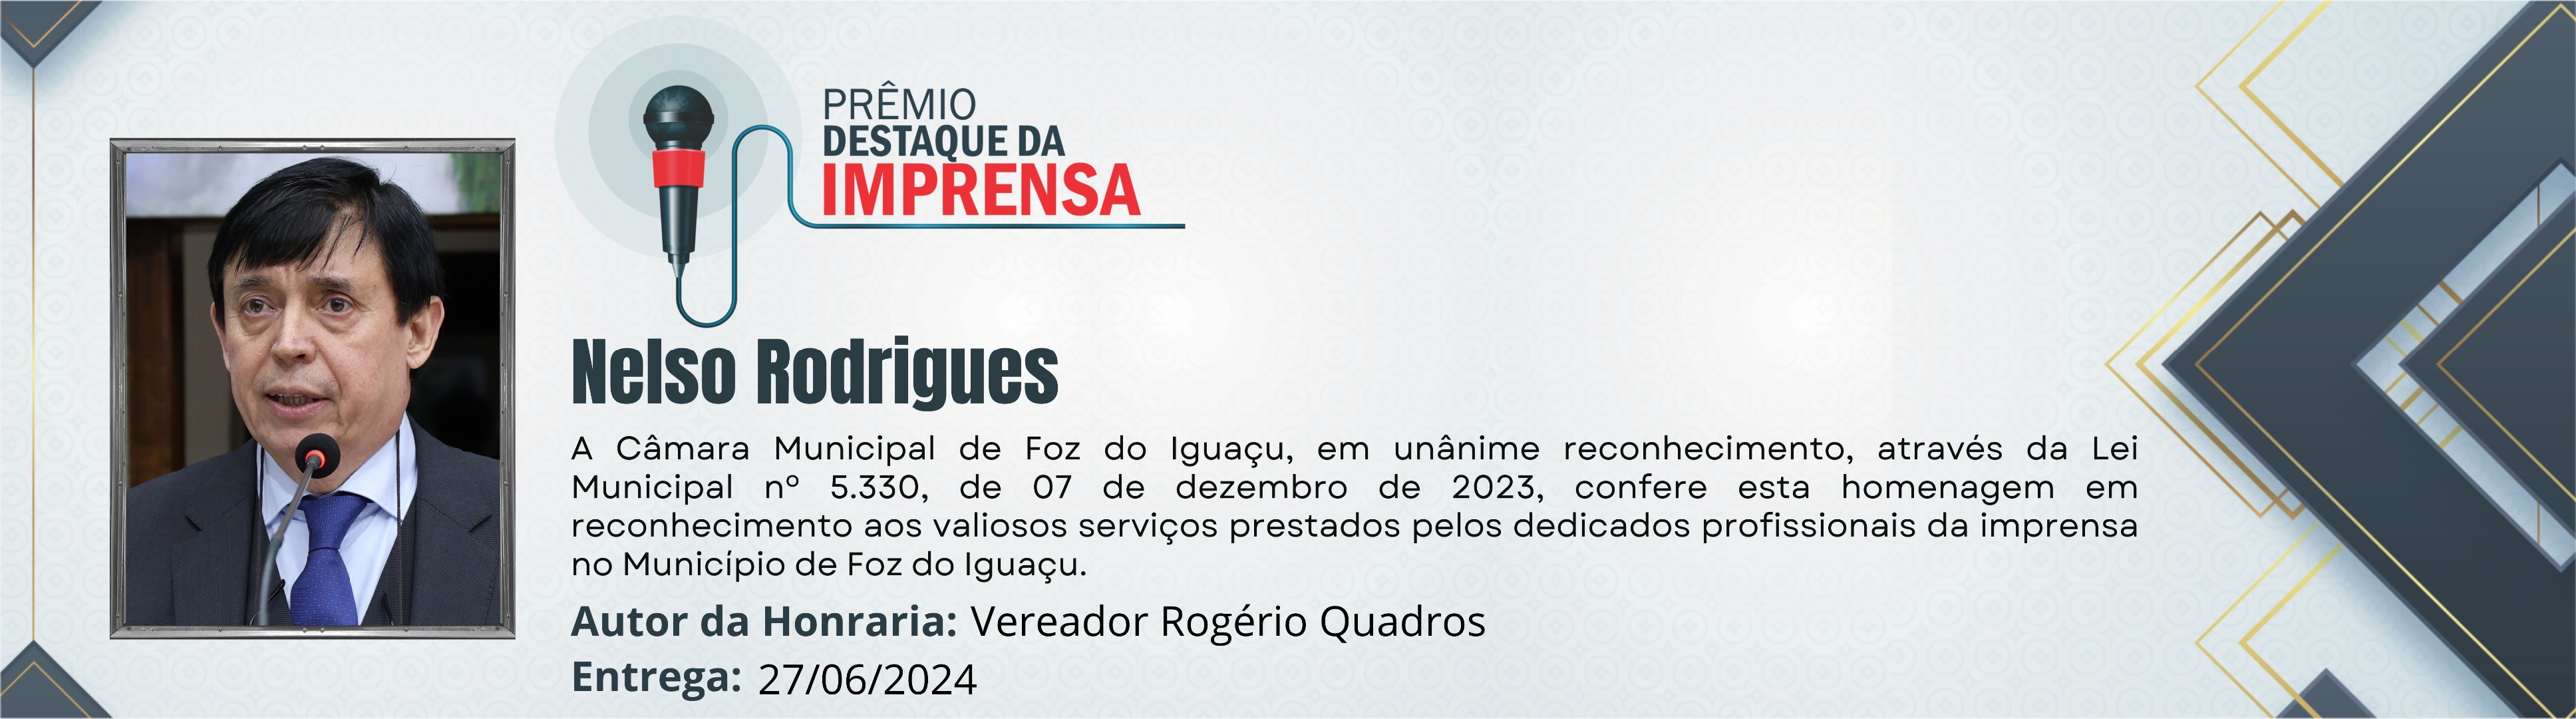 Nelso Rodrigues